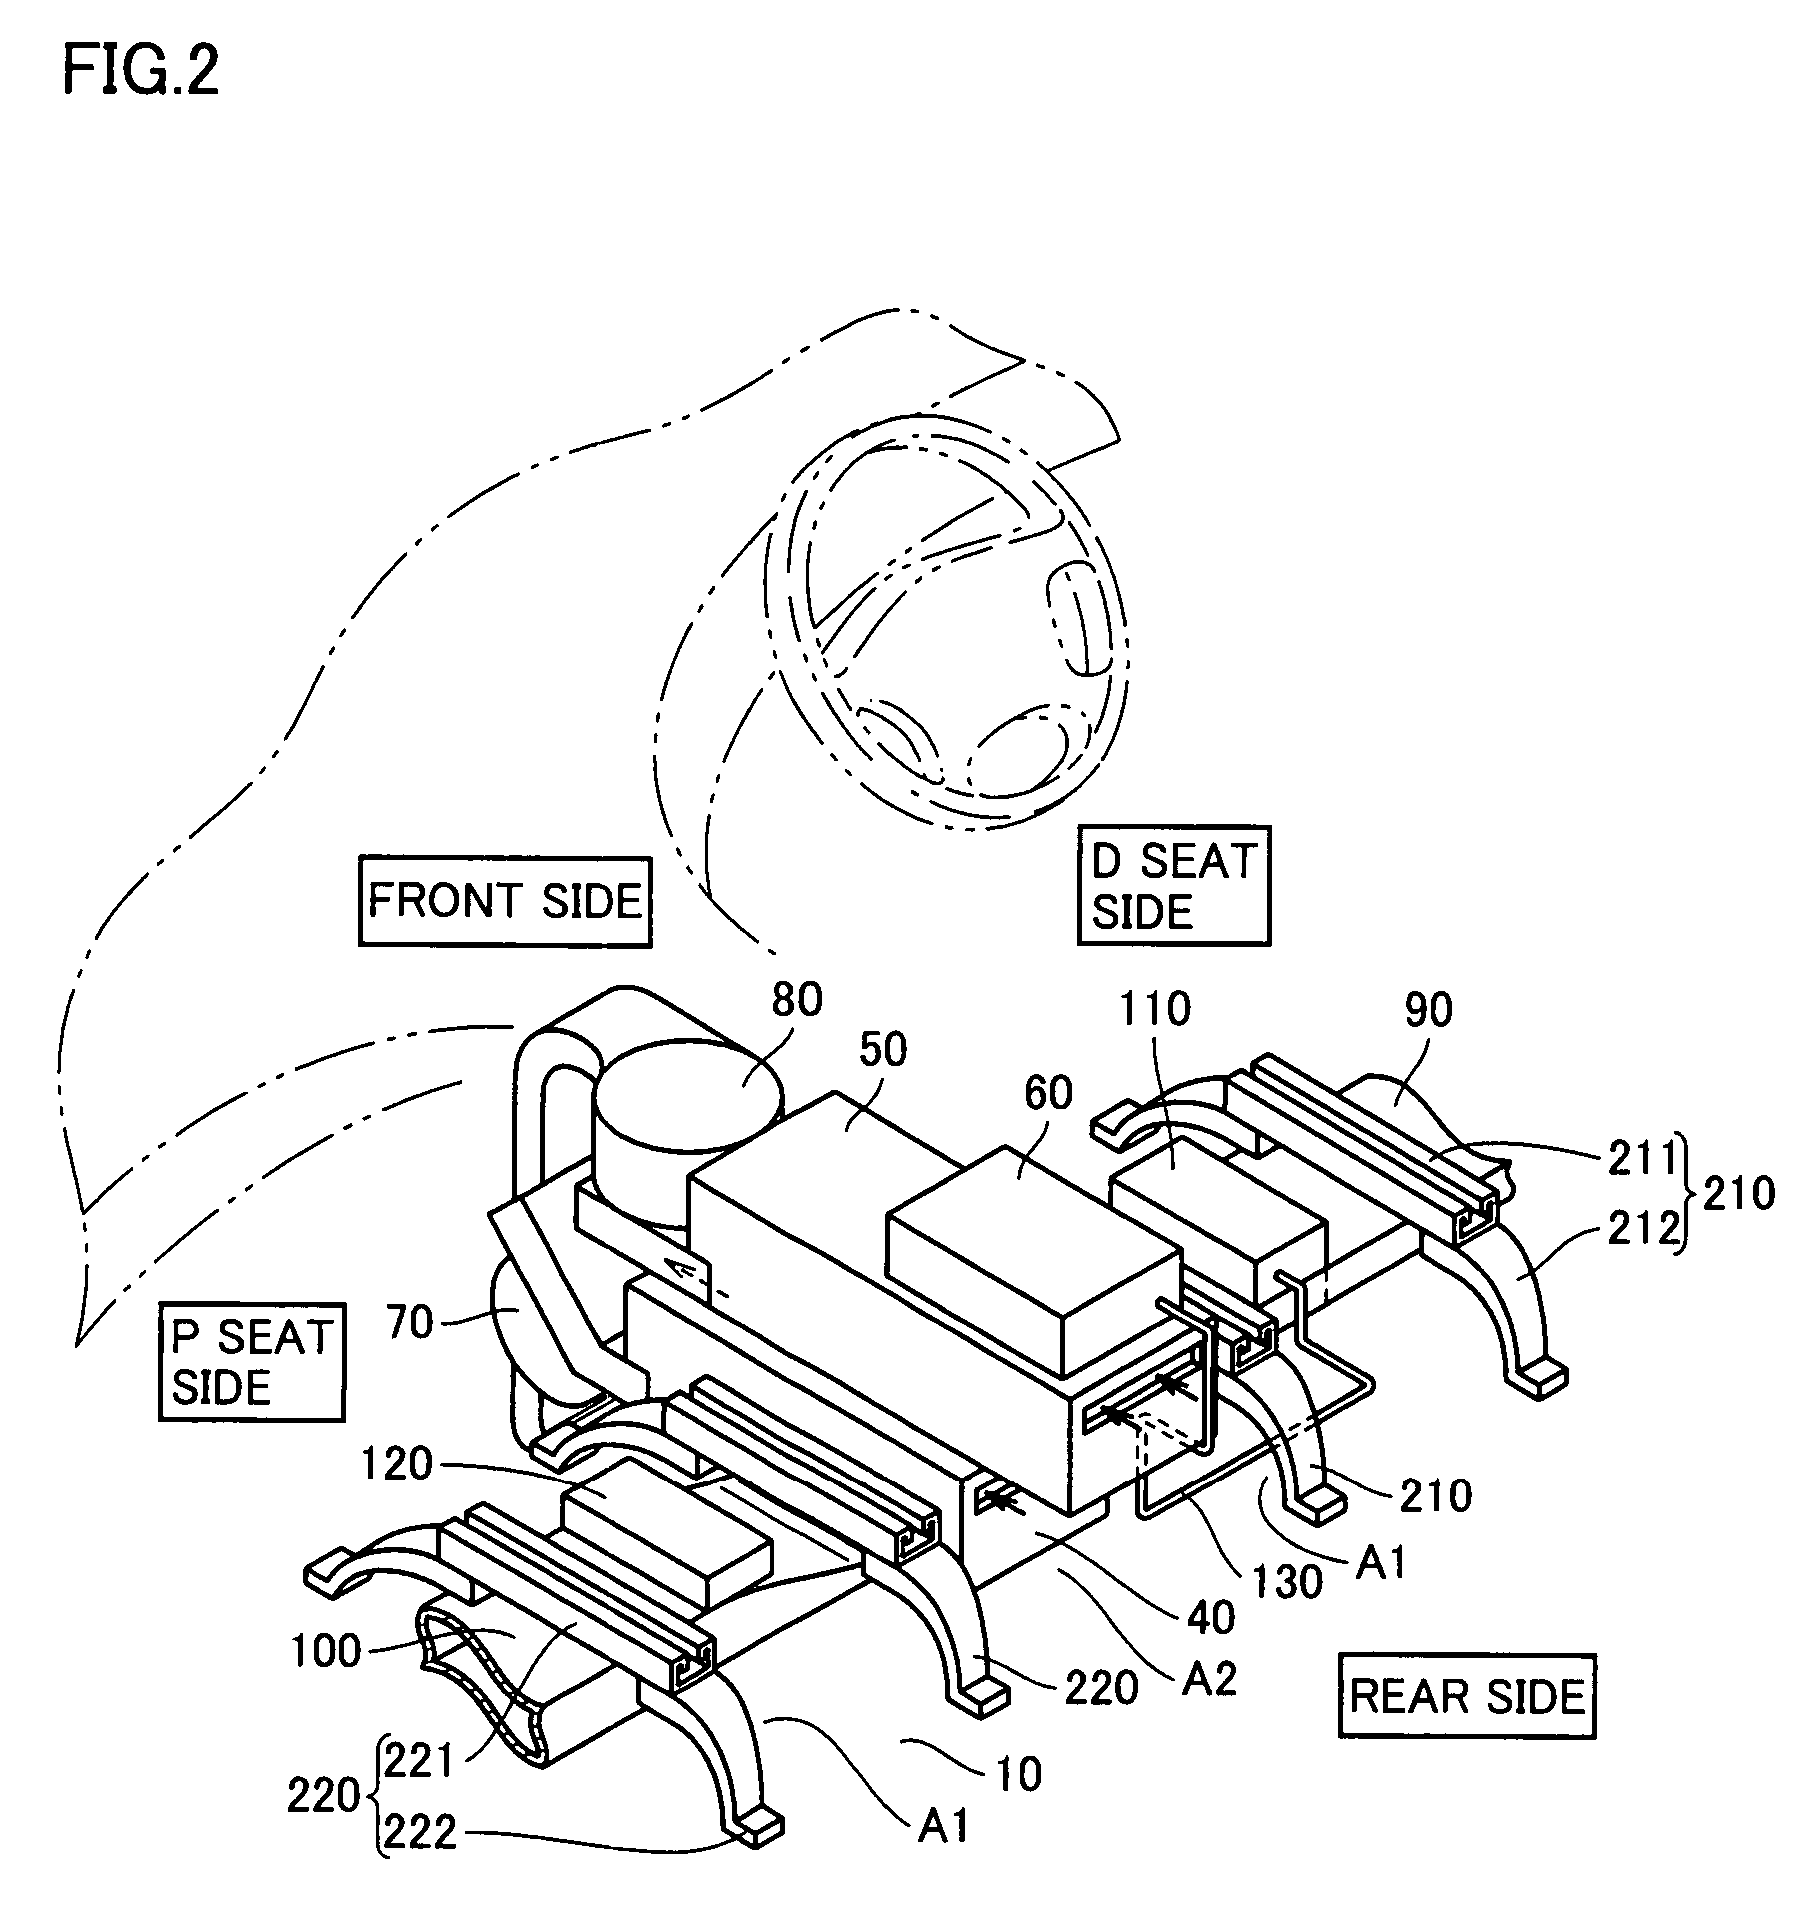 Cooling structure for secondary battery